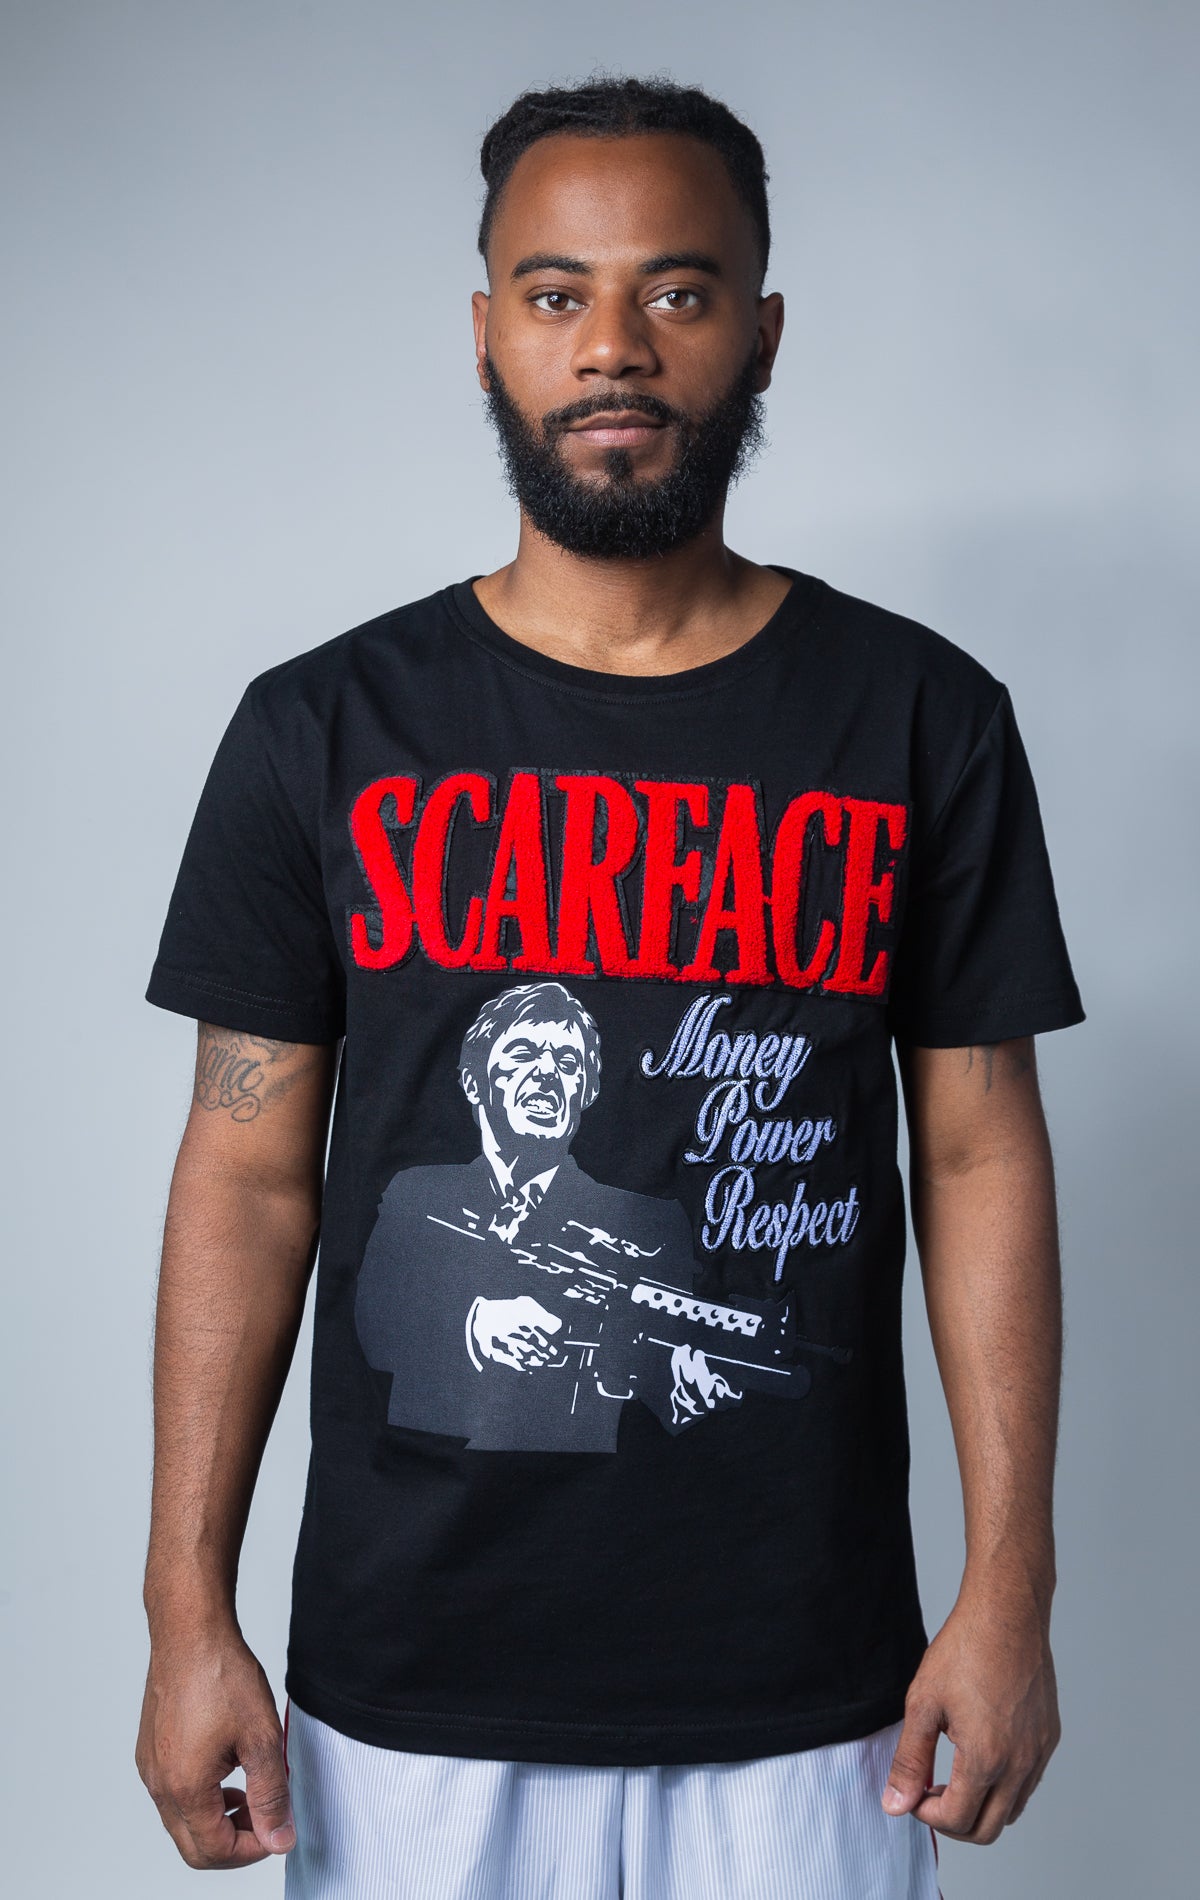 Black Scarface MPR graphic t shirt